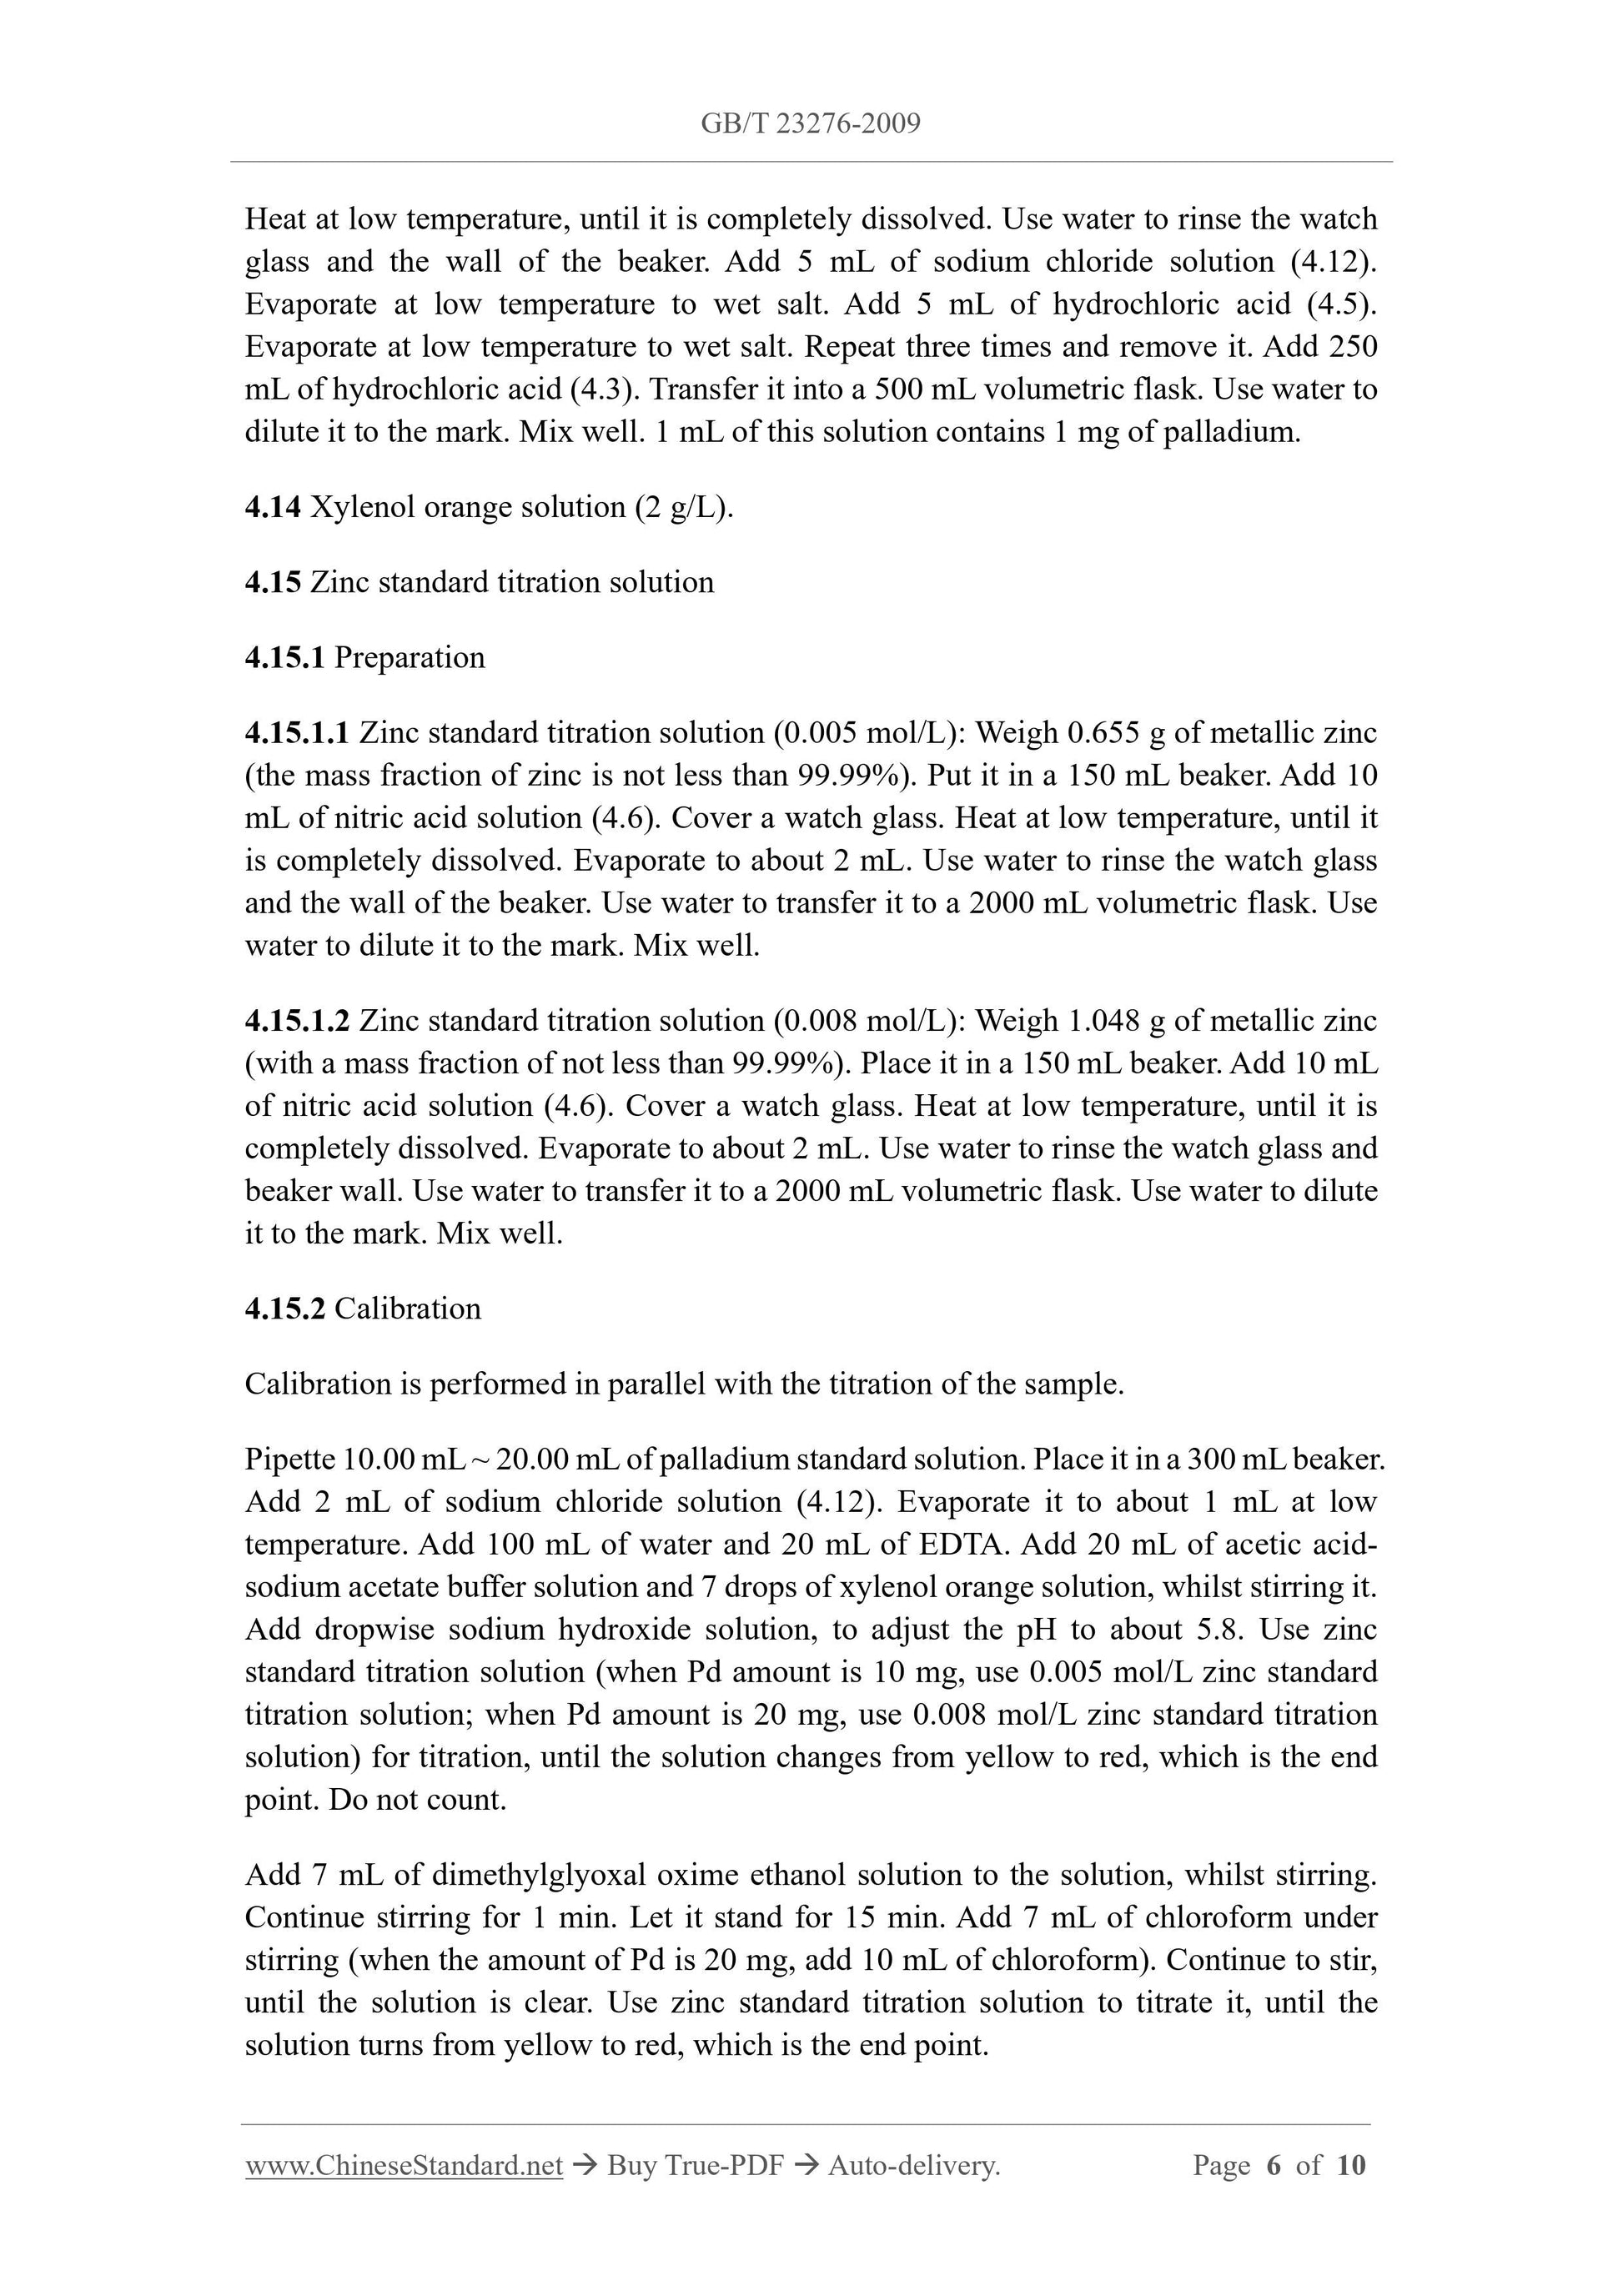 GB/T 23276-2009 Page 4